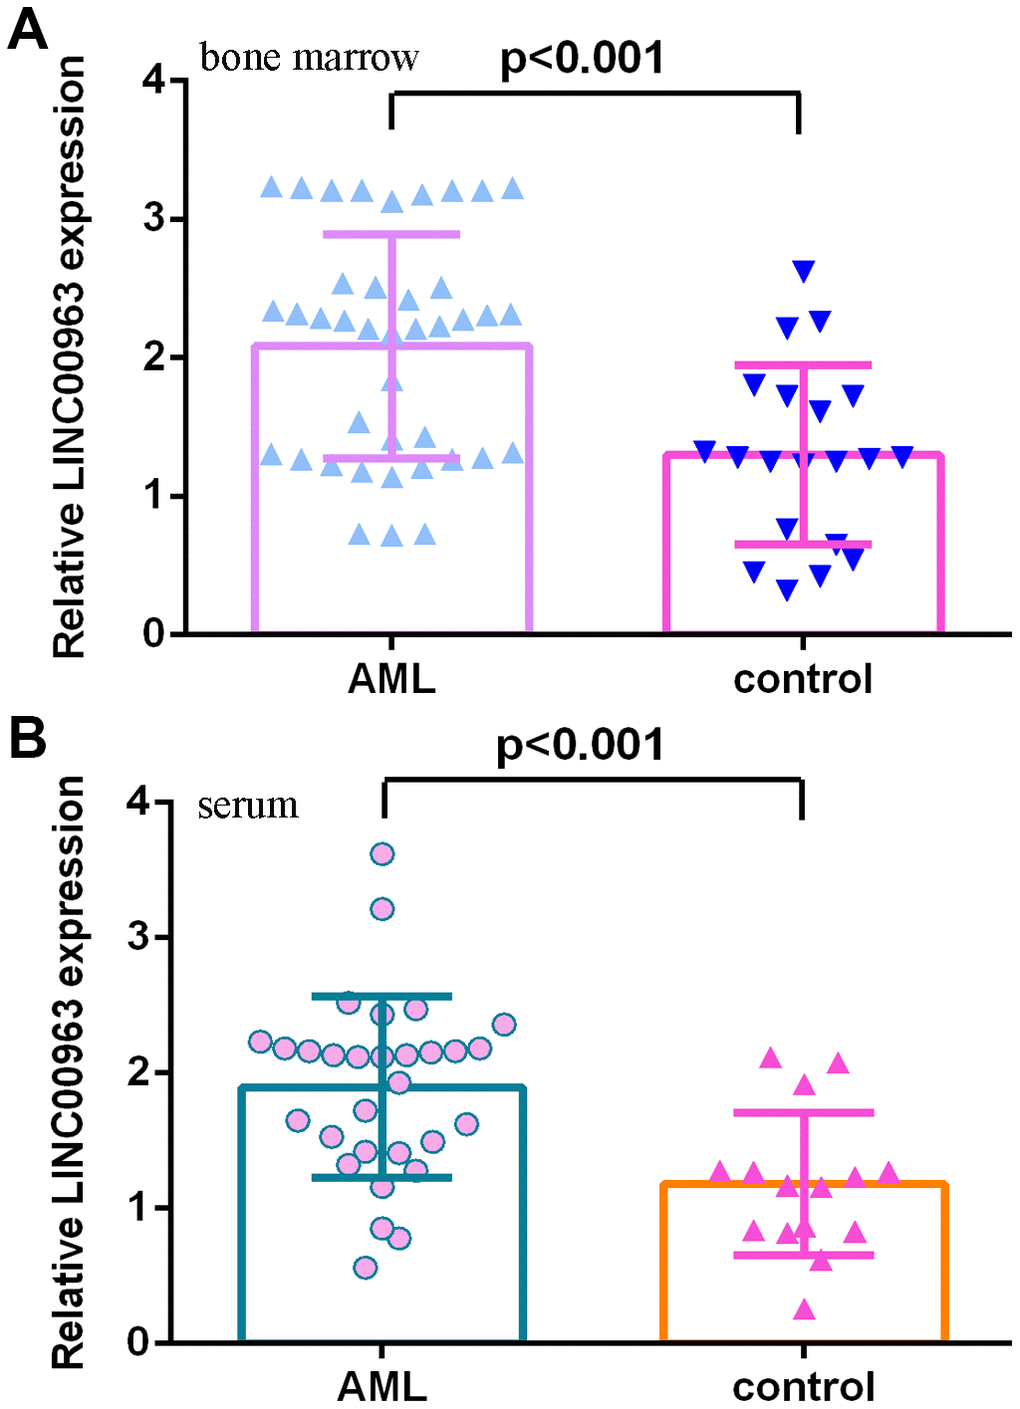 LINC00963 level in AML specimens. (A) LINC00963 levels were higher in the bone marrow of AML cases than in controls. (B) The expression of LINC00963 in the serum of AML cases and controls was measured by RT-qPCR. GAPDH was used as the internal control.